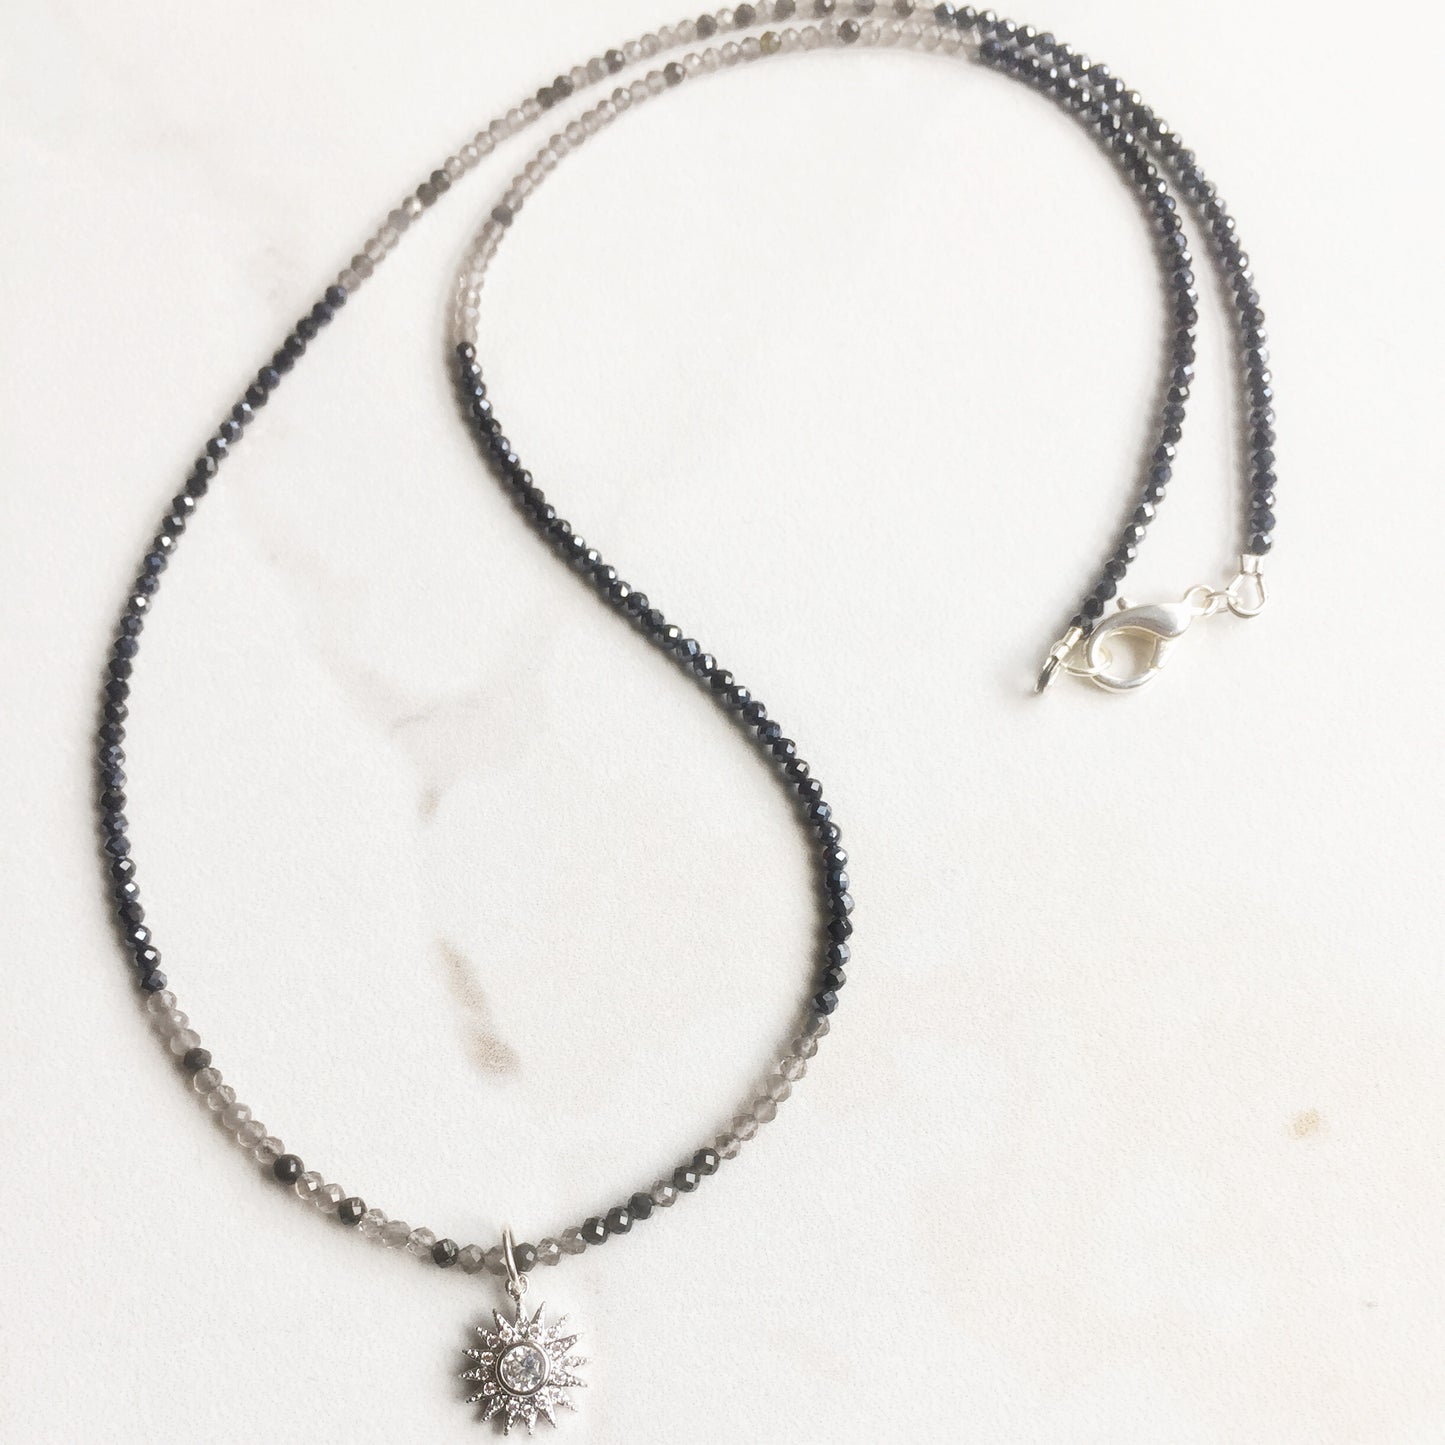 Faceted Black Spinel and Obsidian Necklace with Sunburst Micropave CZ Pendant